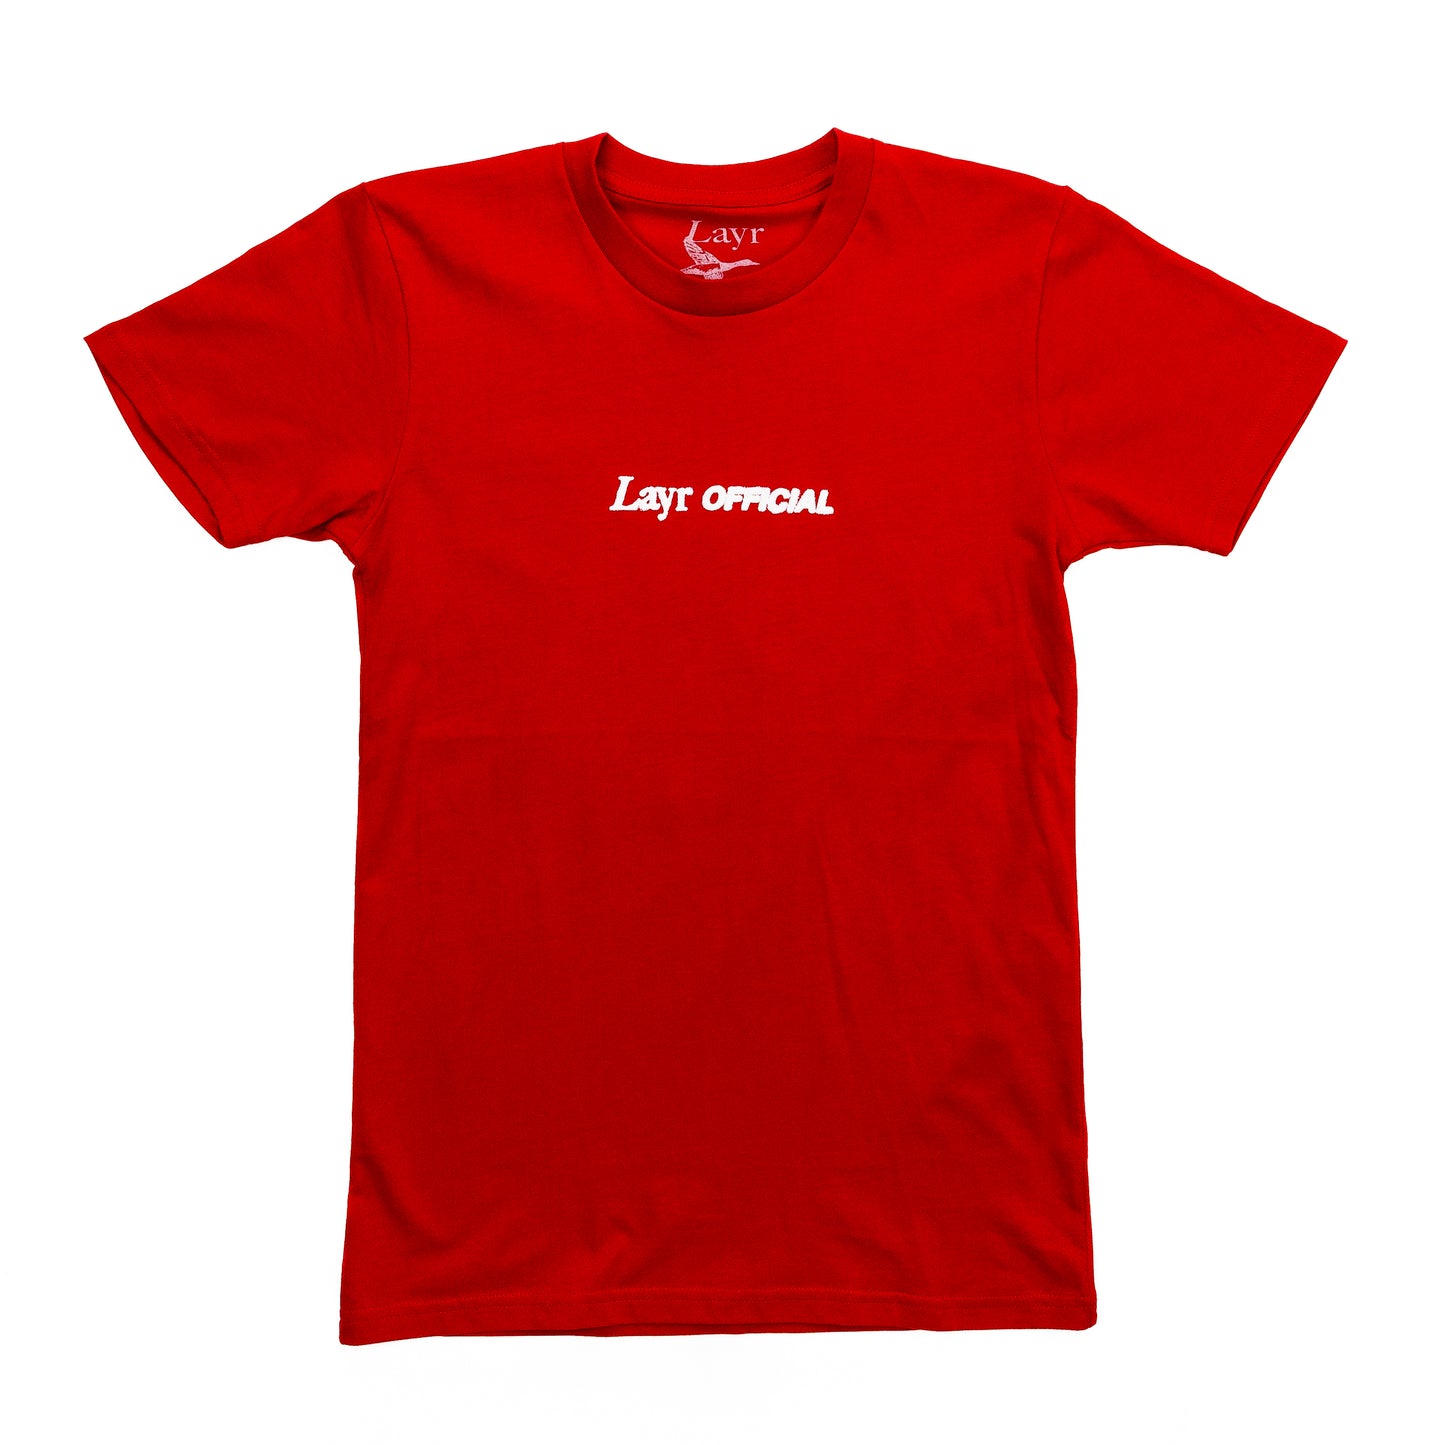 New LO Puff Tee, Red/White - Layr Official